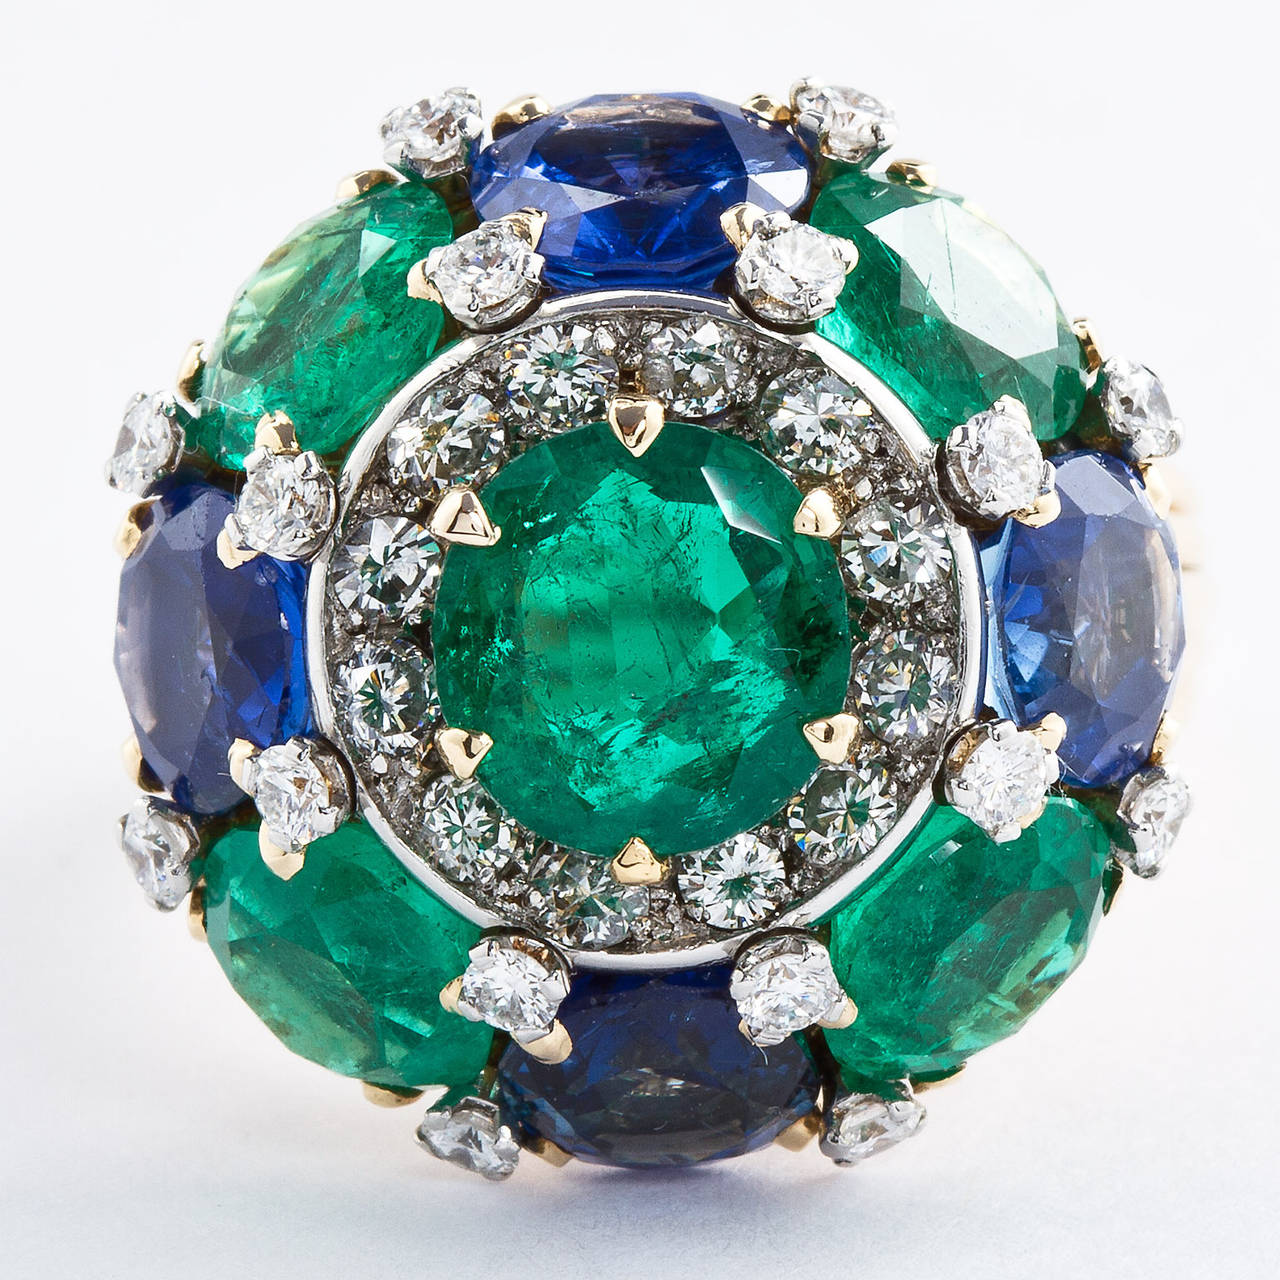 An emerald and sapphire dome ring with diamond accents set in 18k yellow gold. Contains approximately 5.25 carats of emeralds and approx. 3.40 carats of sapphires in round brilliant cut style. A further approx. 1.00 cts total of round brilliant cut